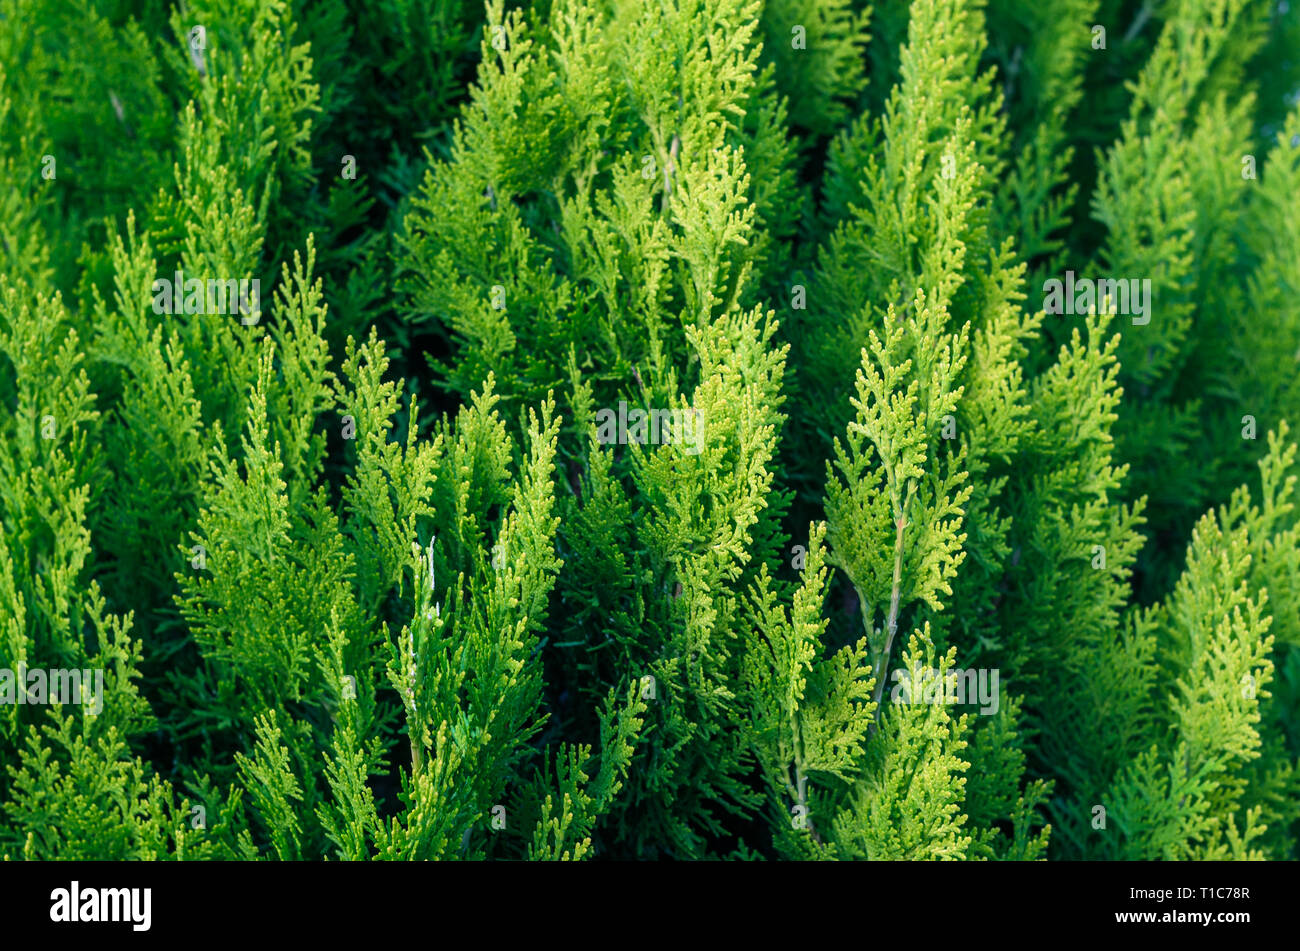 Thuja Coniferous Plant Texture. Green Floral Blank Background Stock Photo